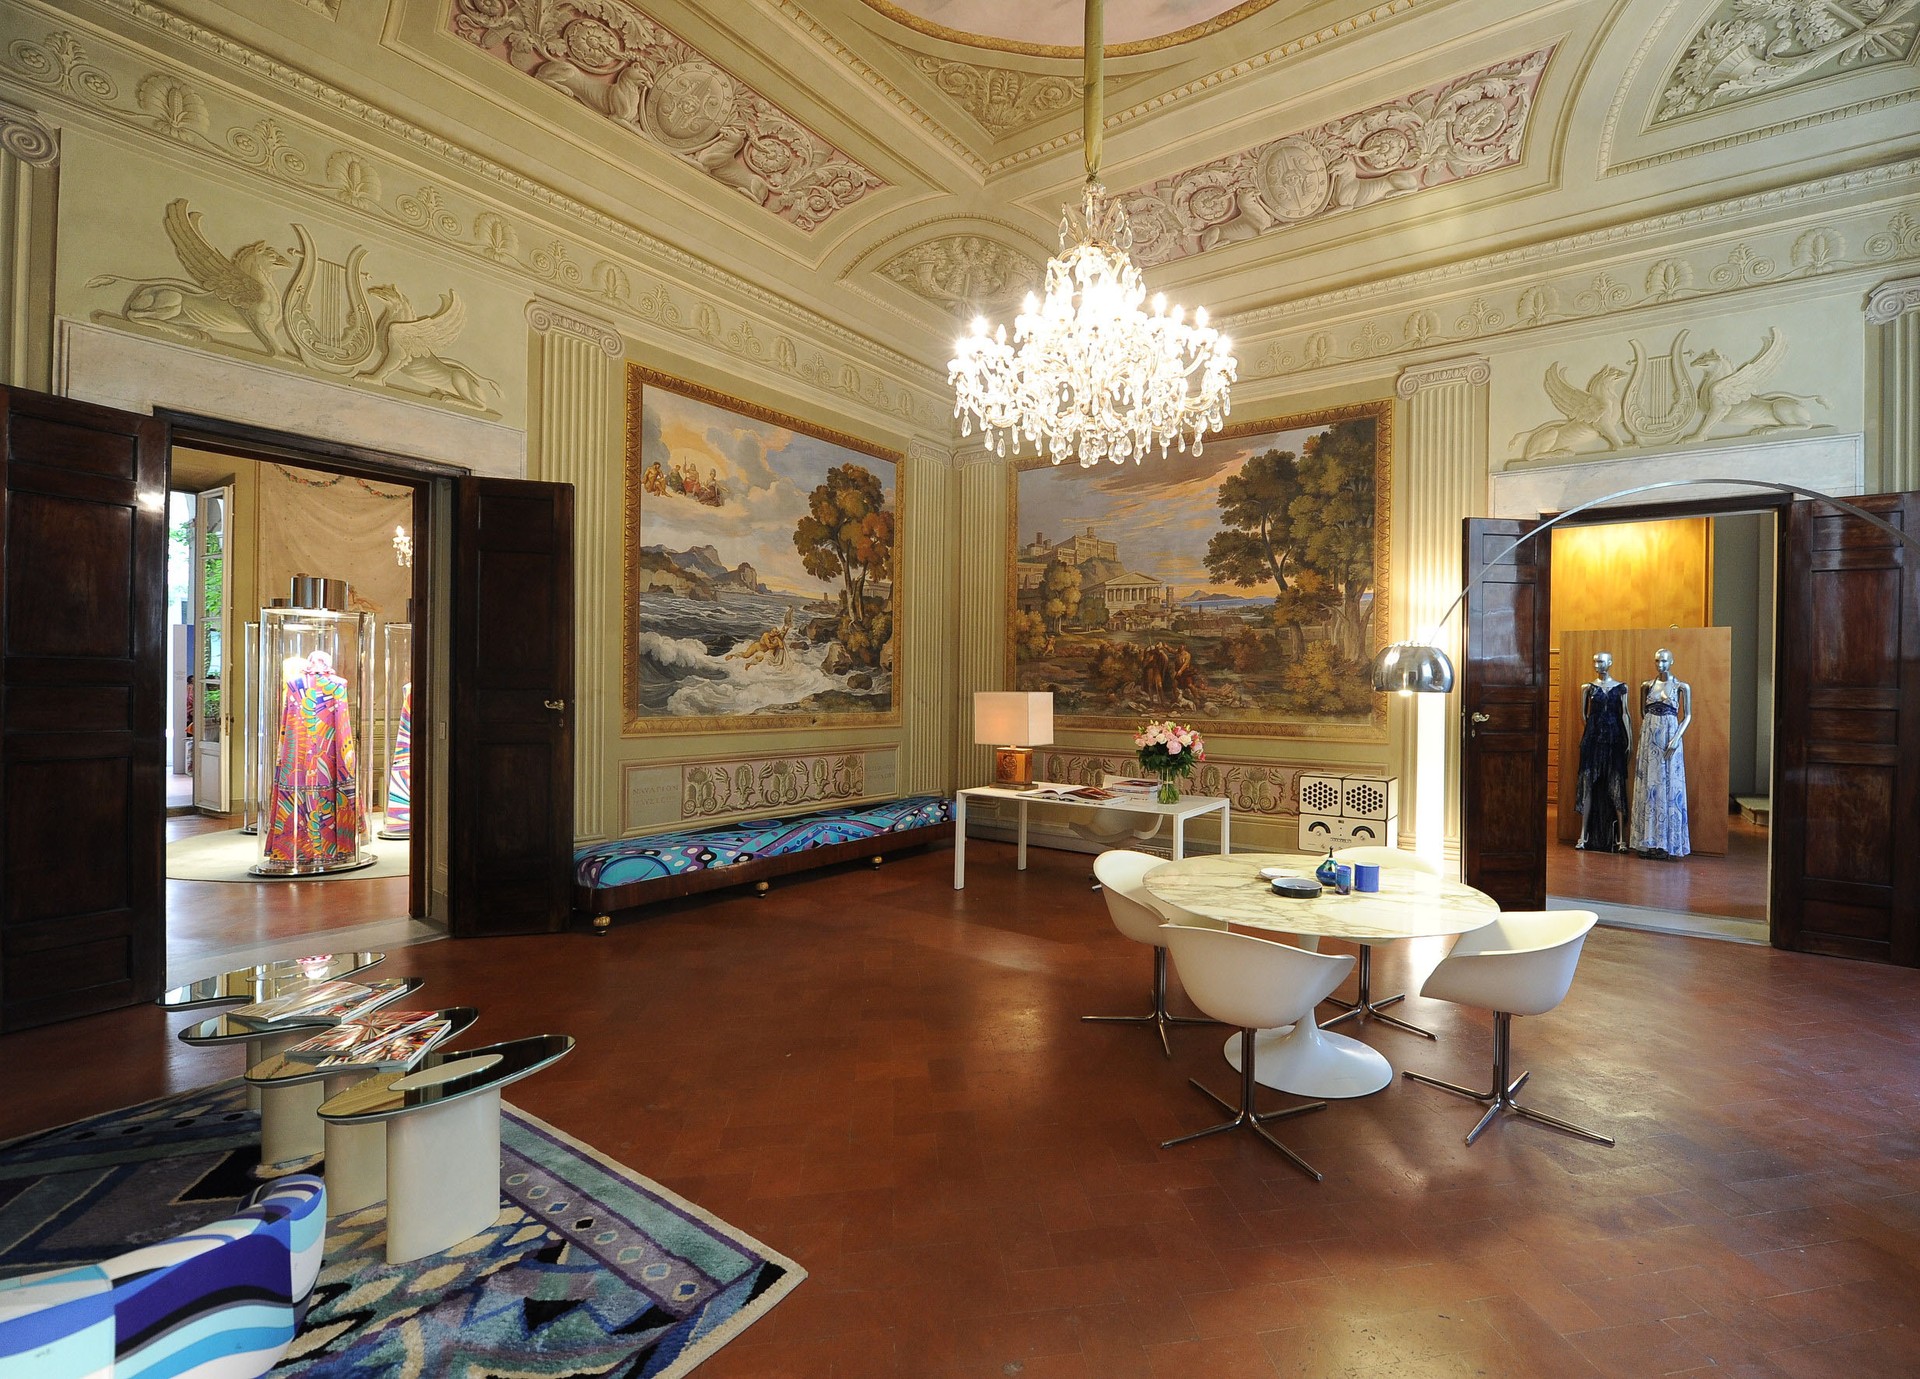 Palazzo Pucci opened its doors for  the ‘Design the Dream’  experience (Foto: Suzy Menkes)